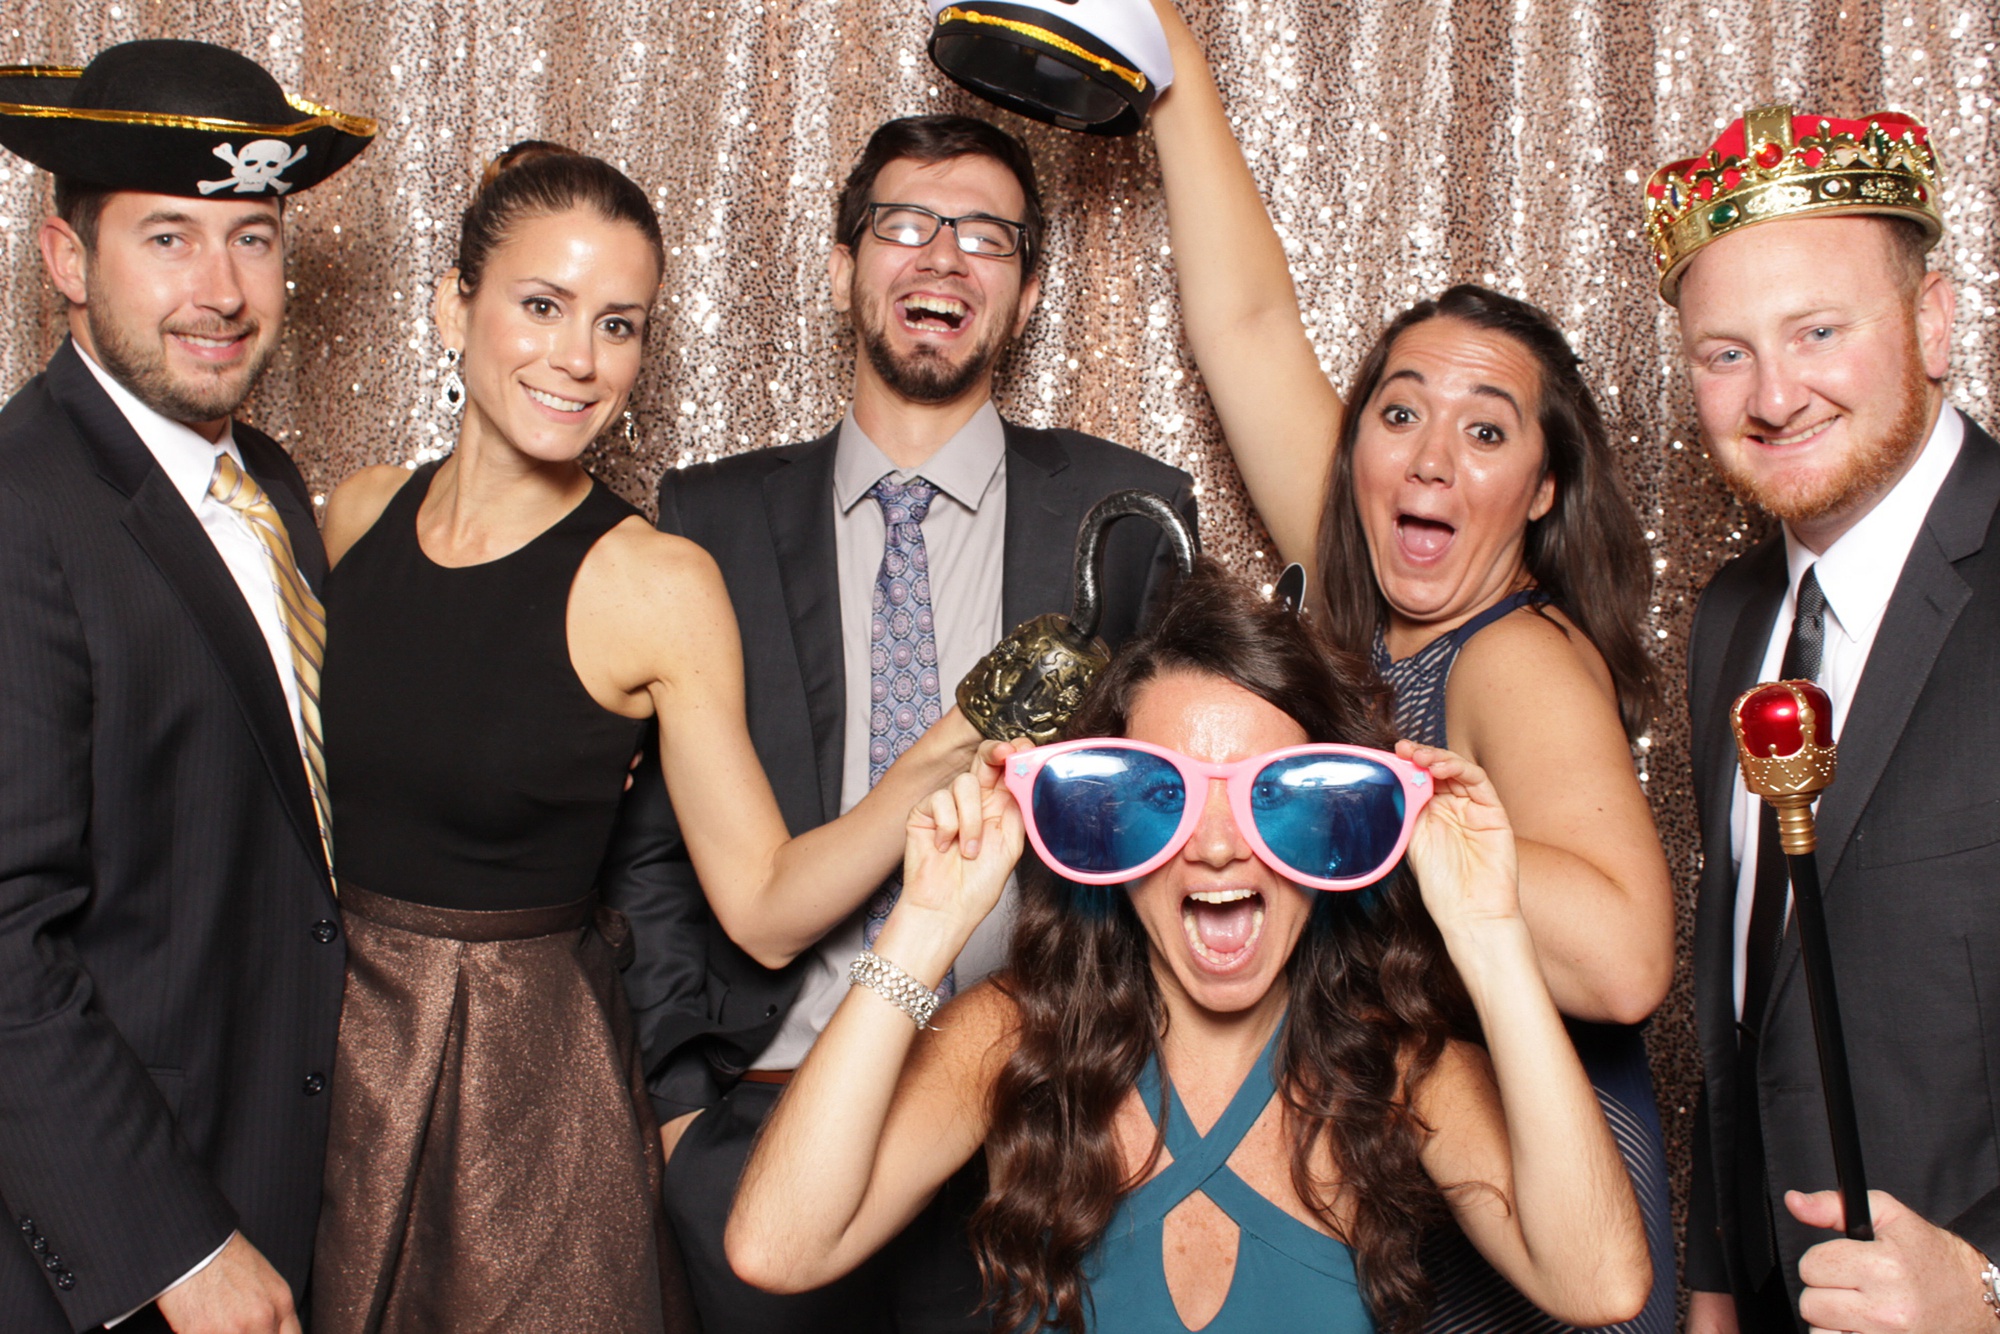 group poses in photo booth during NJ reception